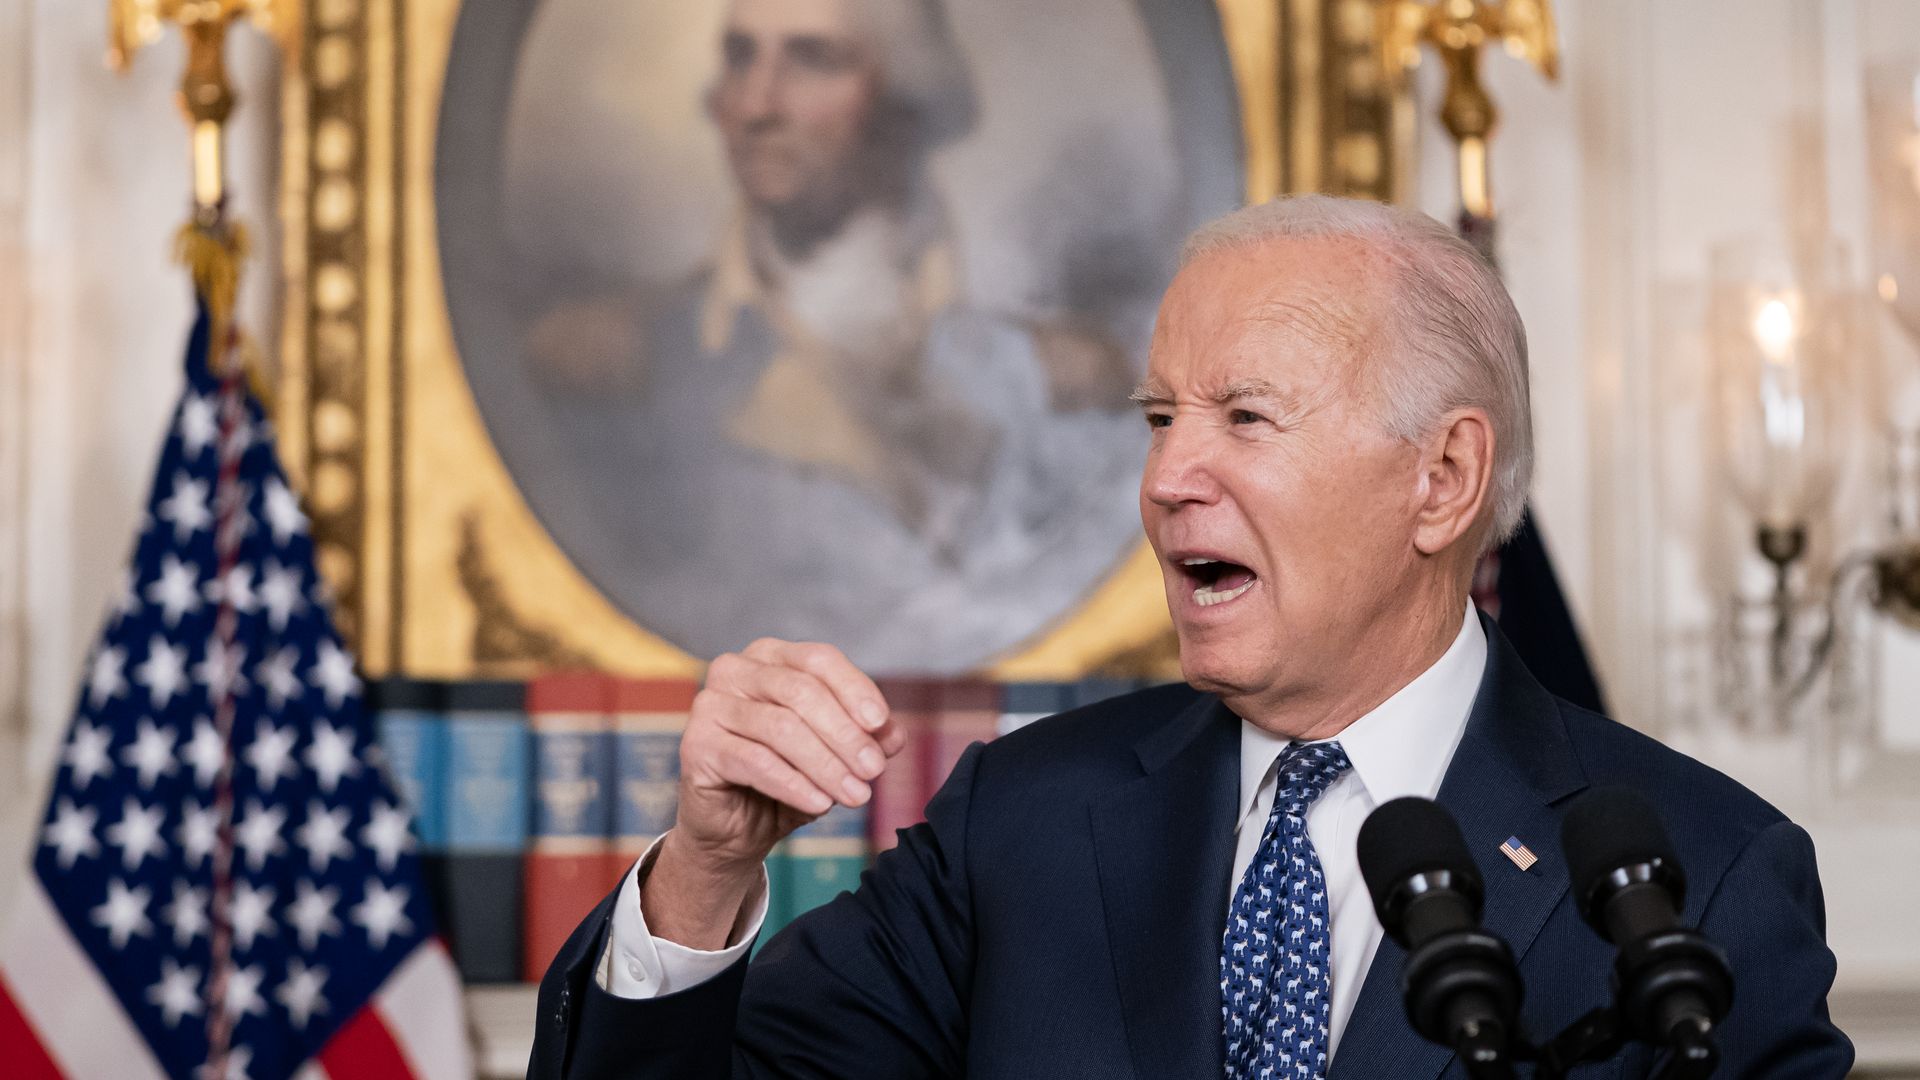 President Biden speaks behind a podium with a portrait of George Washington in the background.